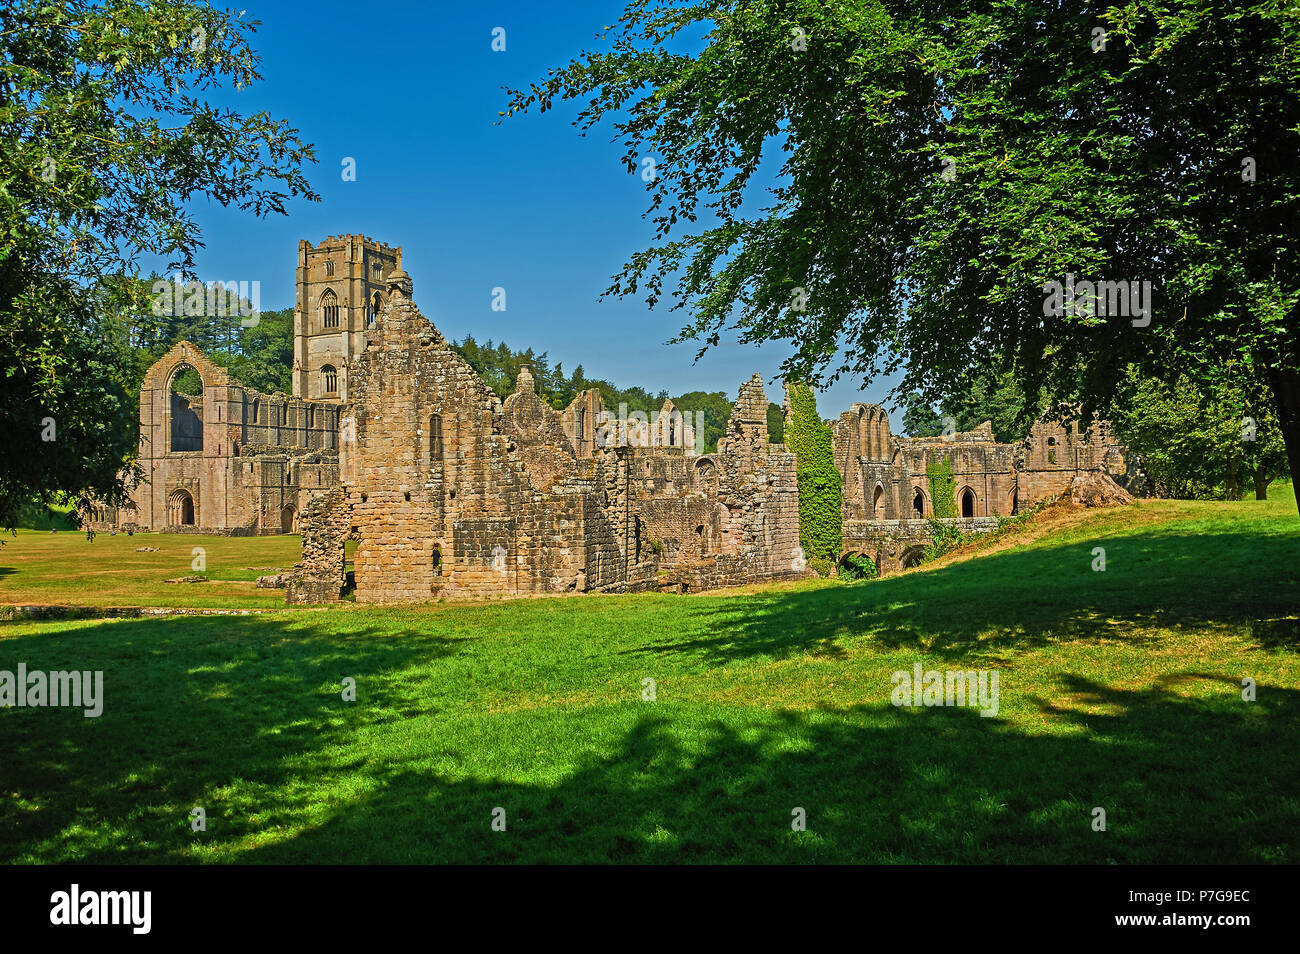 The ruins of Fountains Abbey in North Yorkshire under a clear blue sky. The abbey was largely destroyed during King Henry VIII's reformation. Stock Photo